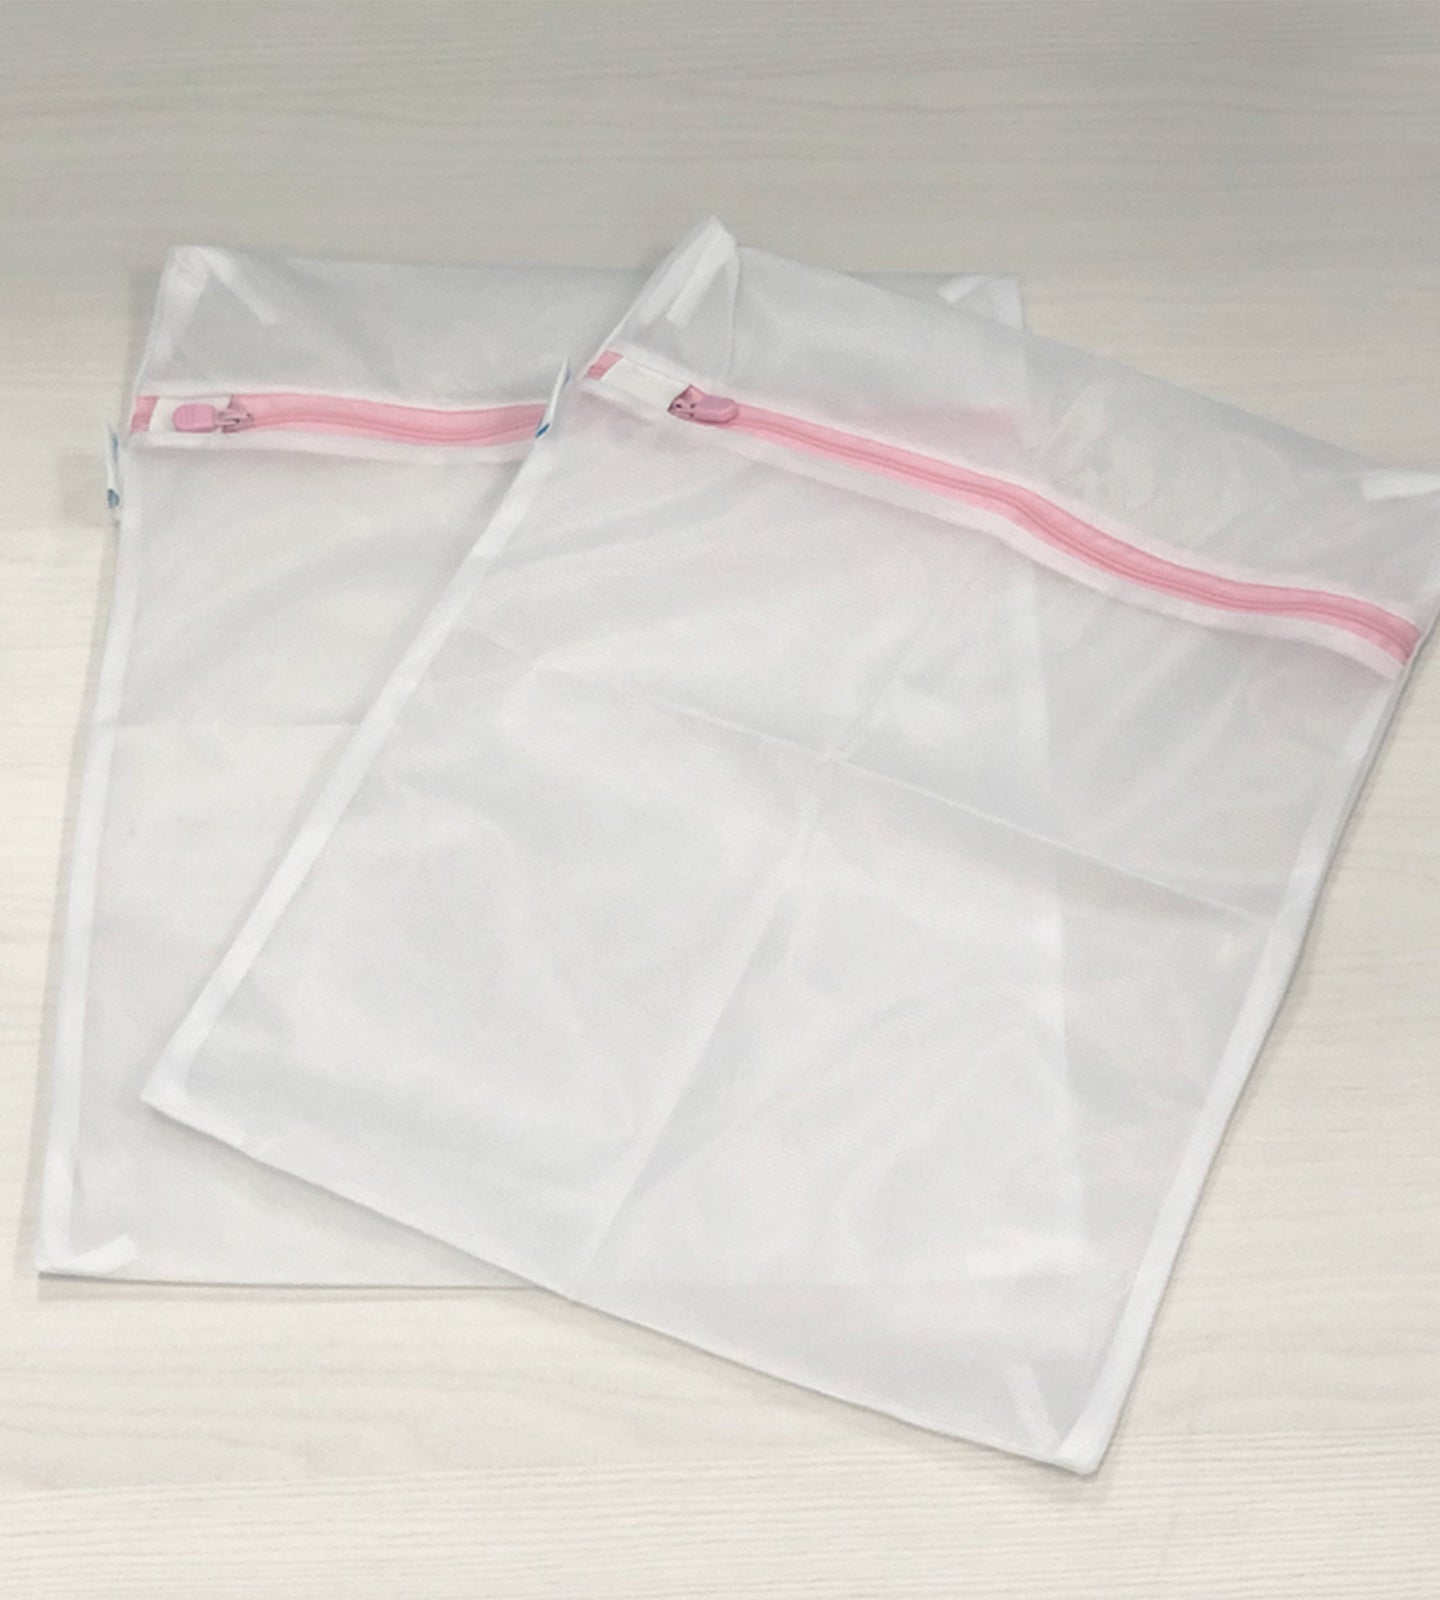 Mesh Laundry Bag – 2 Pack - Brolly Sheets AU